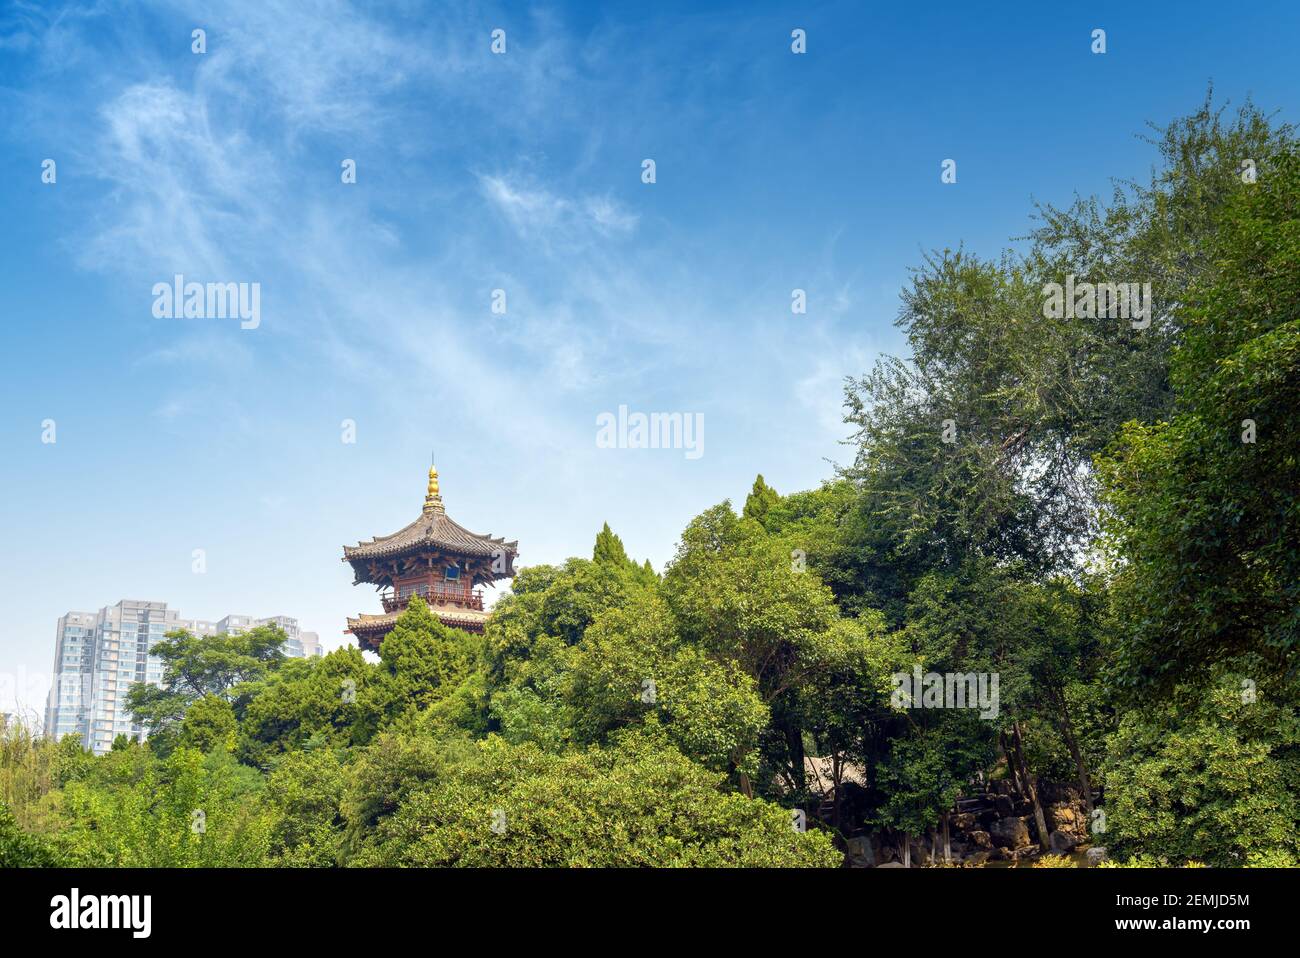 Ancient architecture in Xi'an, China: Pagoda. Stock Photo